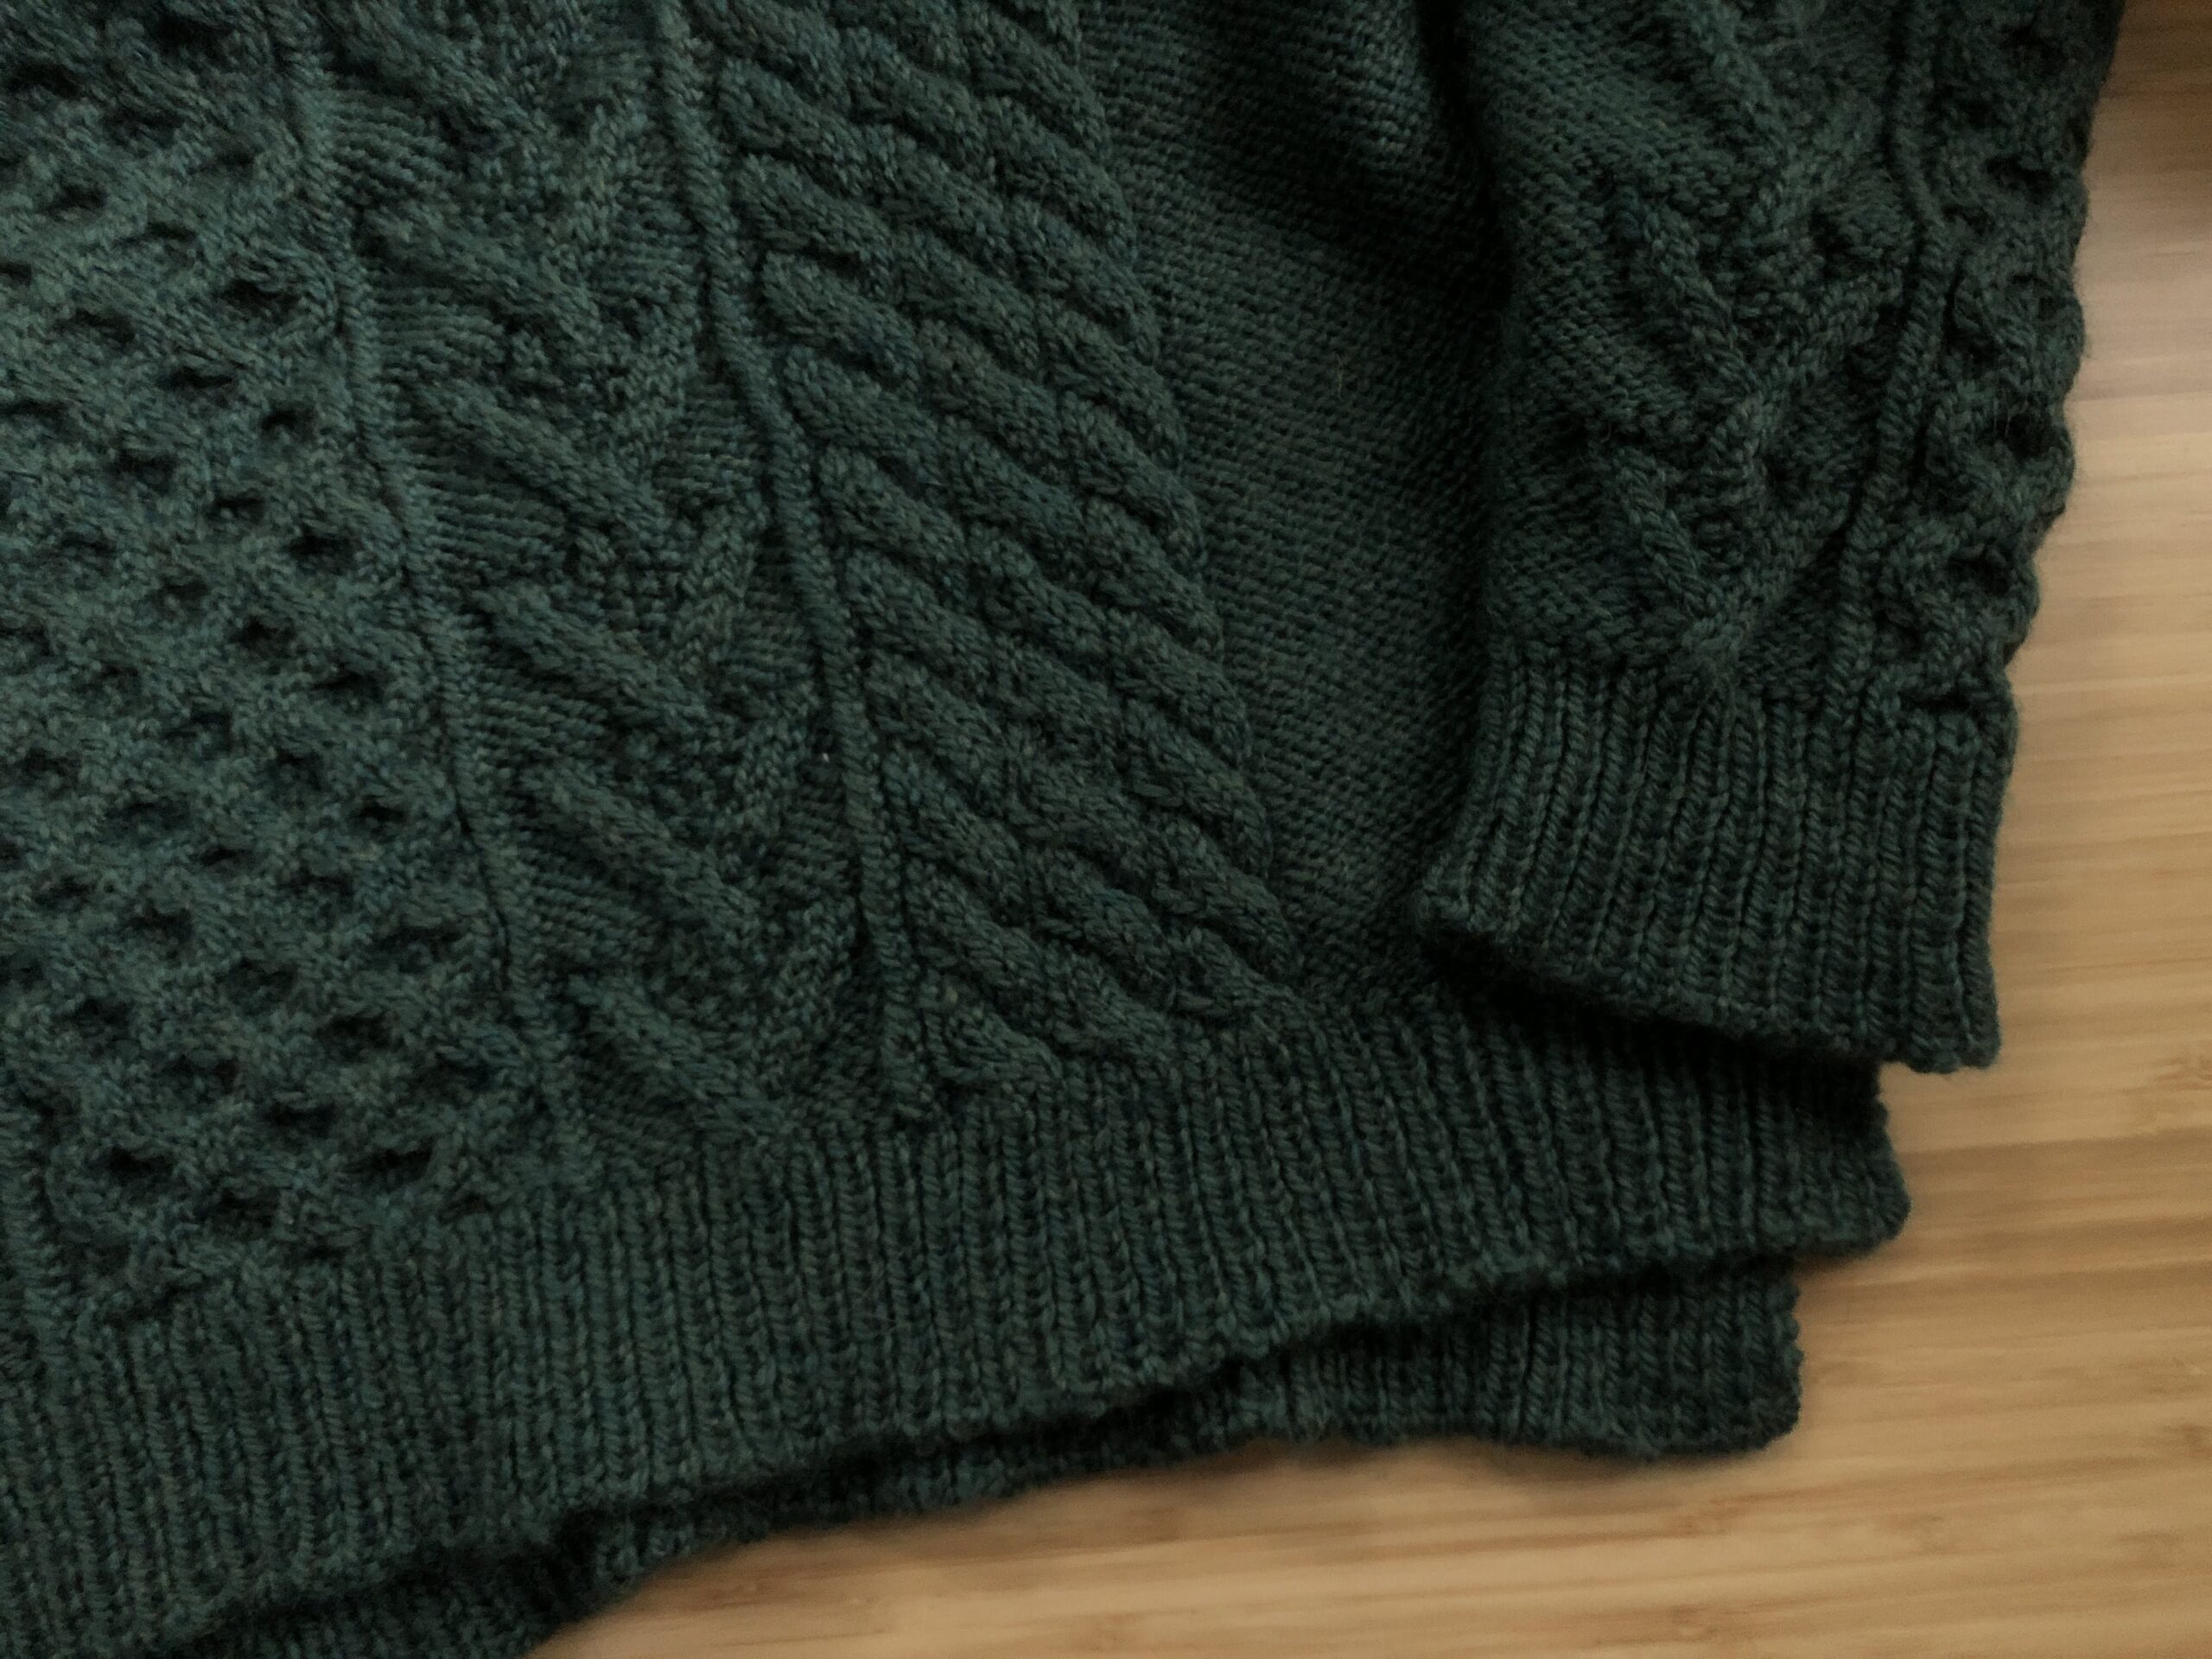 Flat lay photo of the Bronwyn Sweater, focused on the ribbed hems.